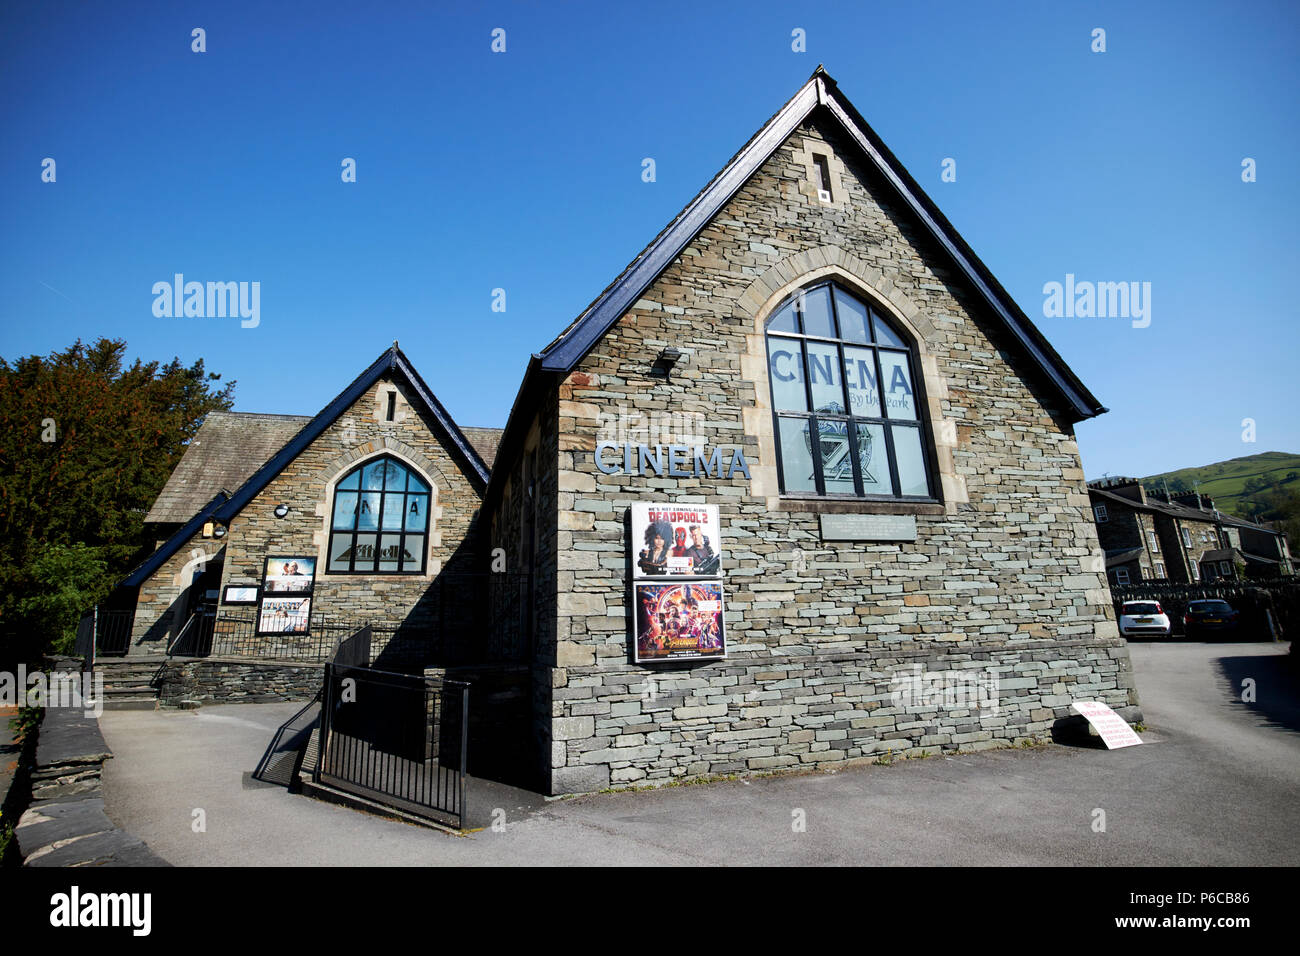 Cinema by the park in an old school building in Ambleside lake district cumbria england uk Stock Photo